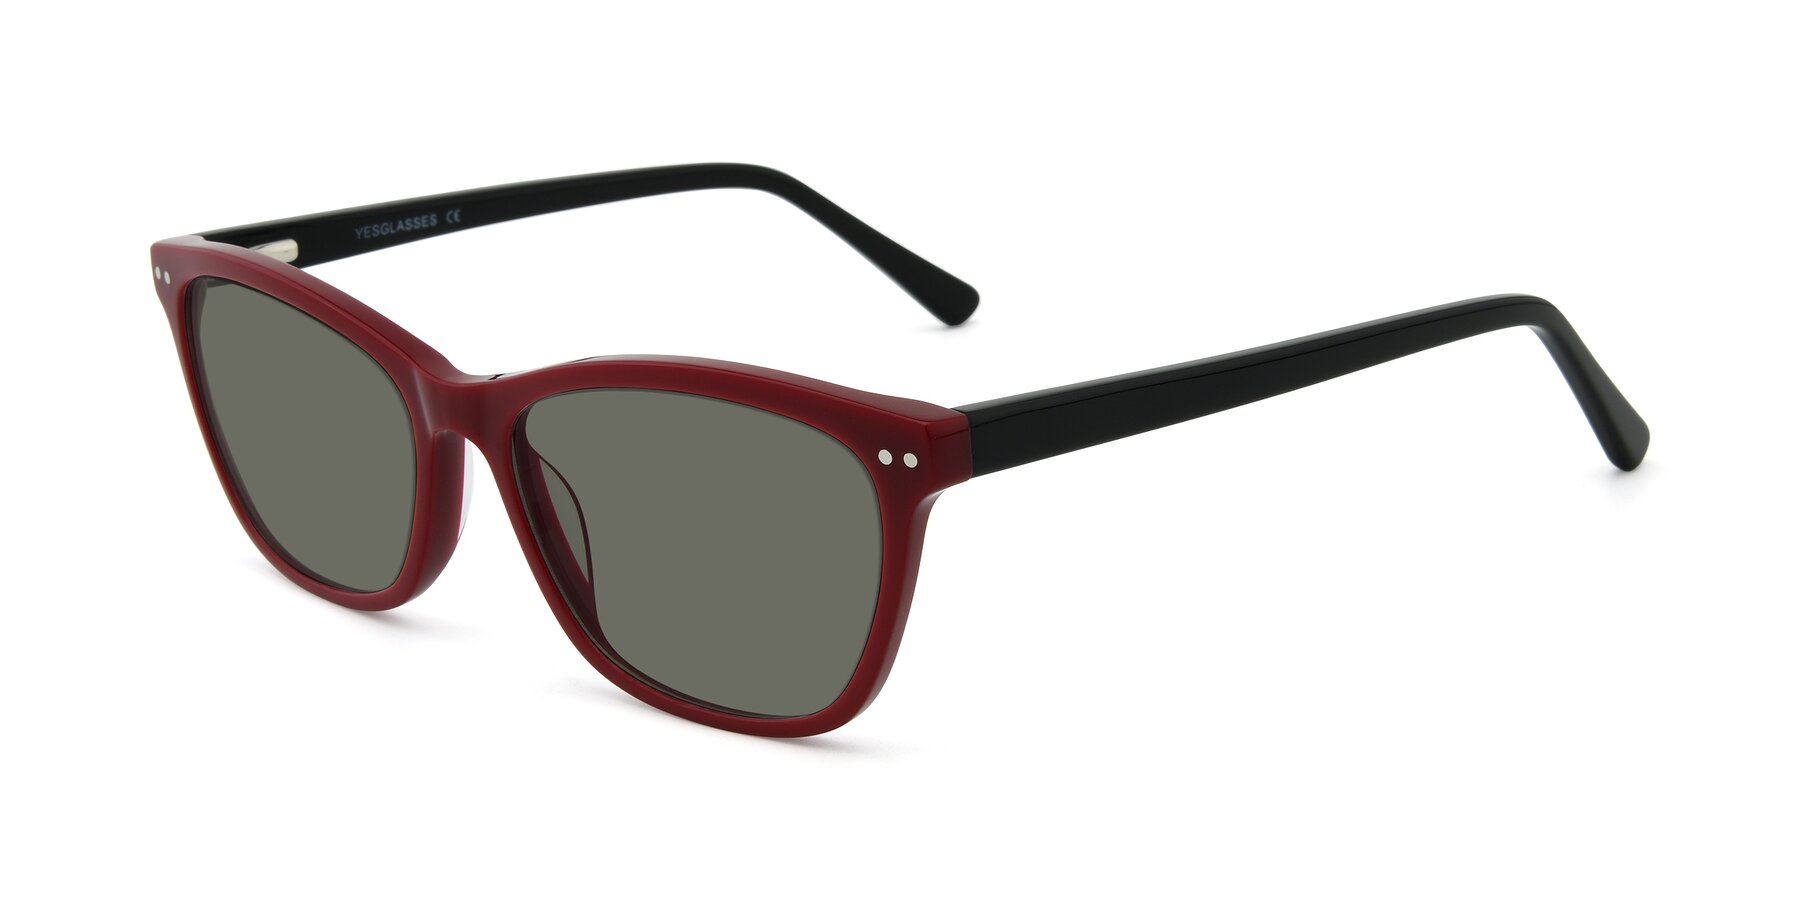 Angle of 17350 in Wine with Gray Polarized Lenses